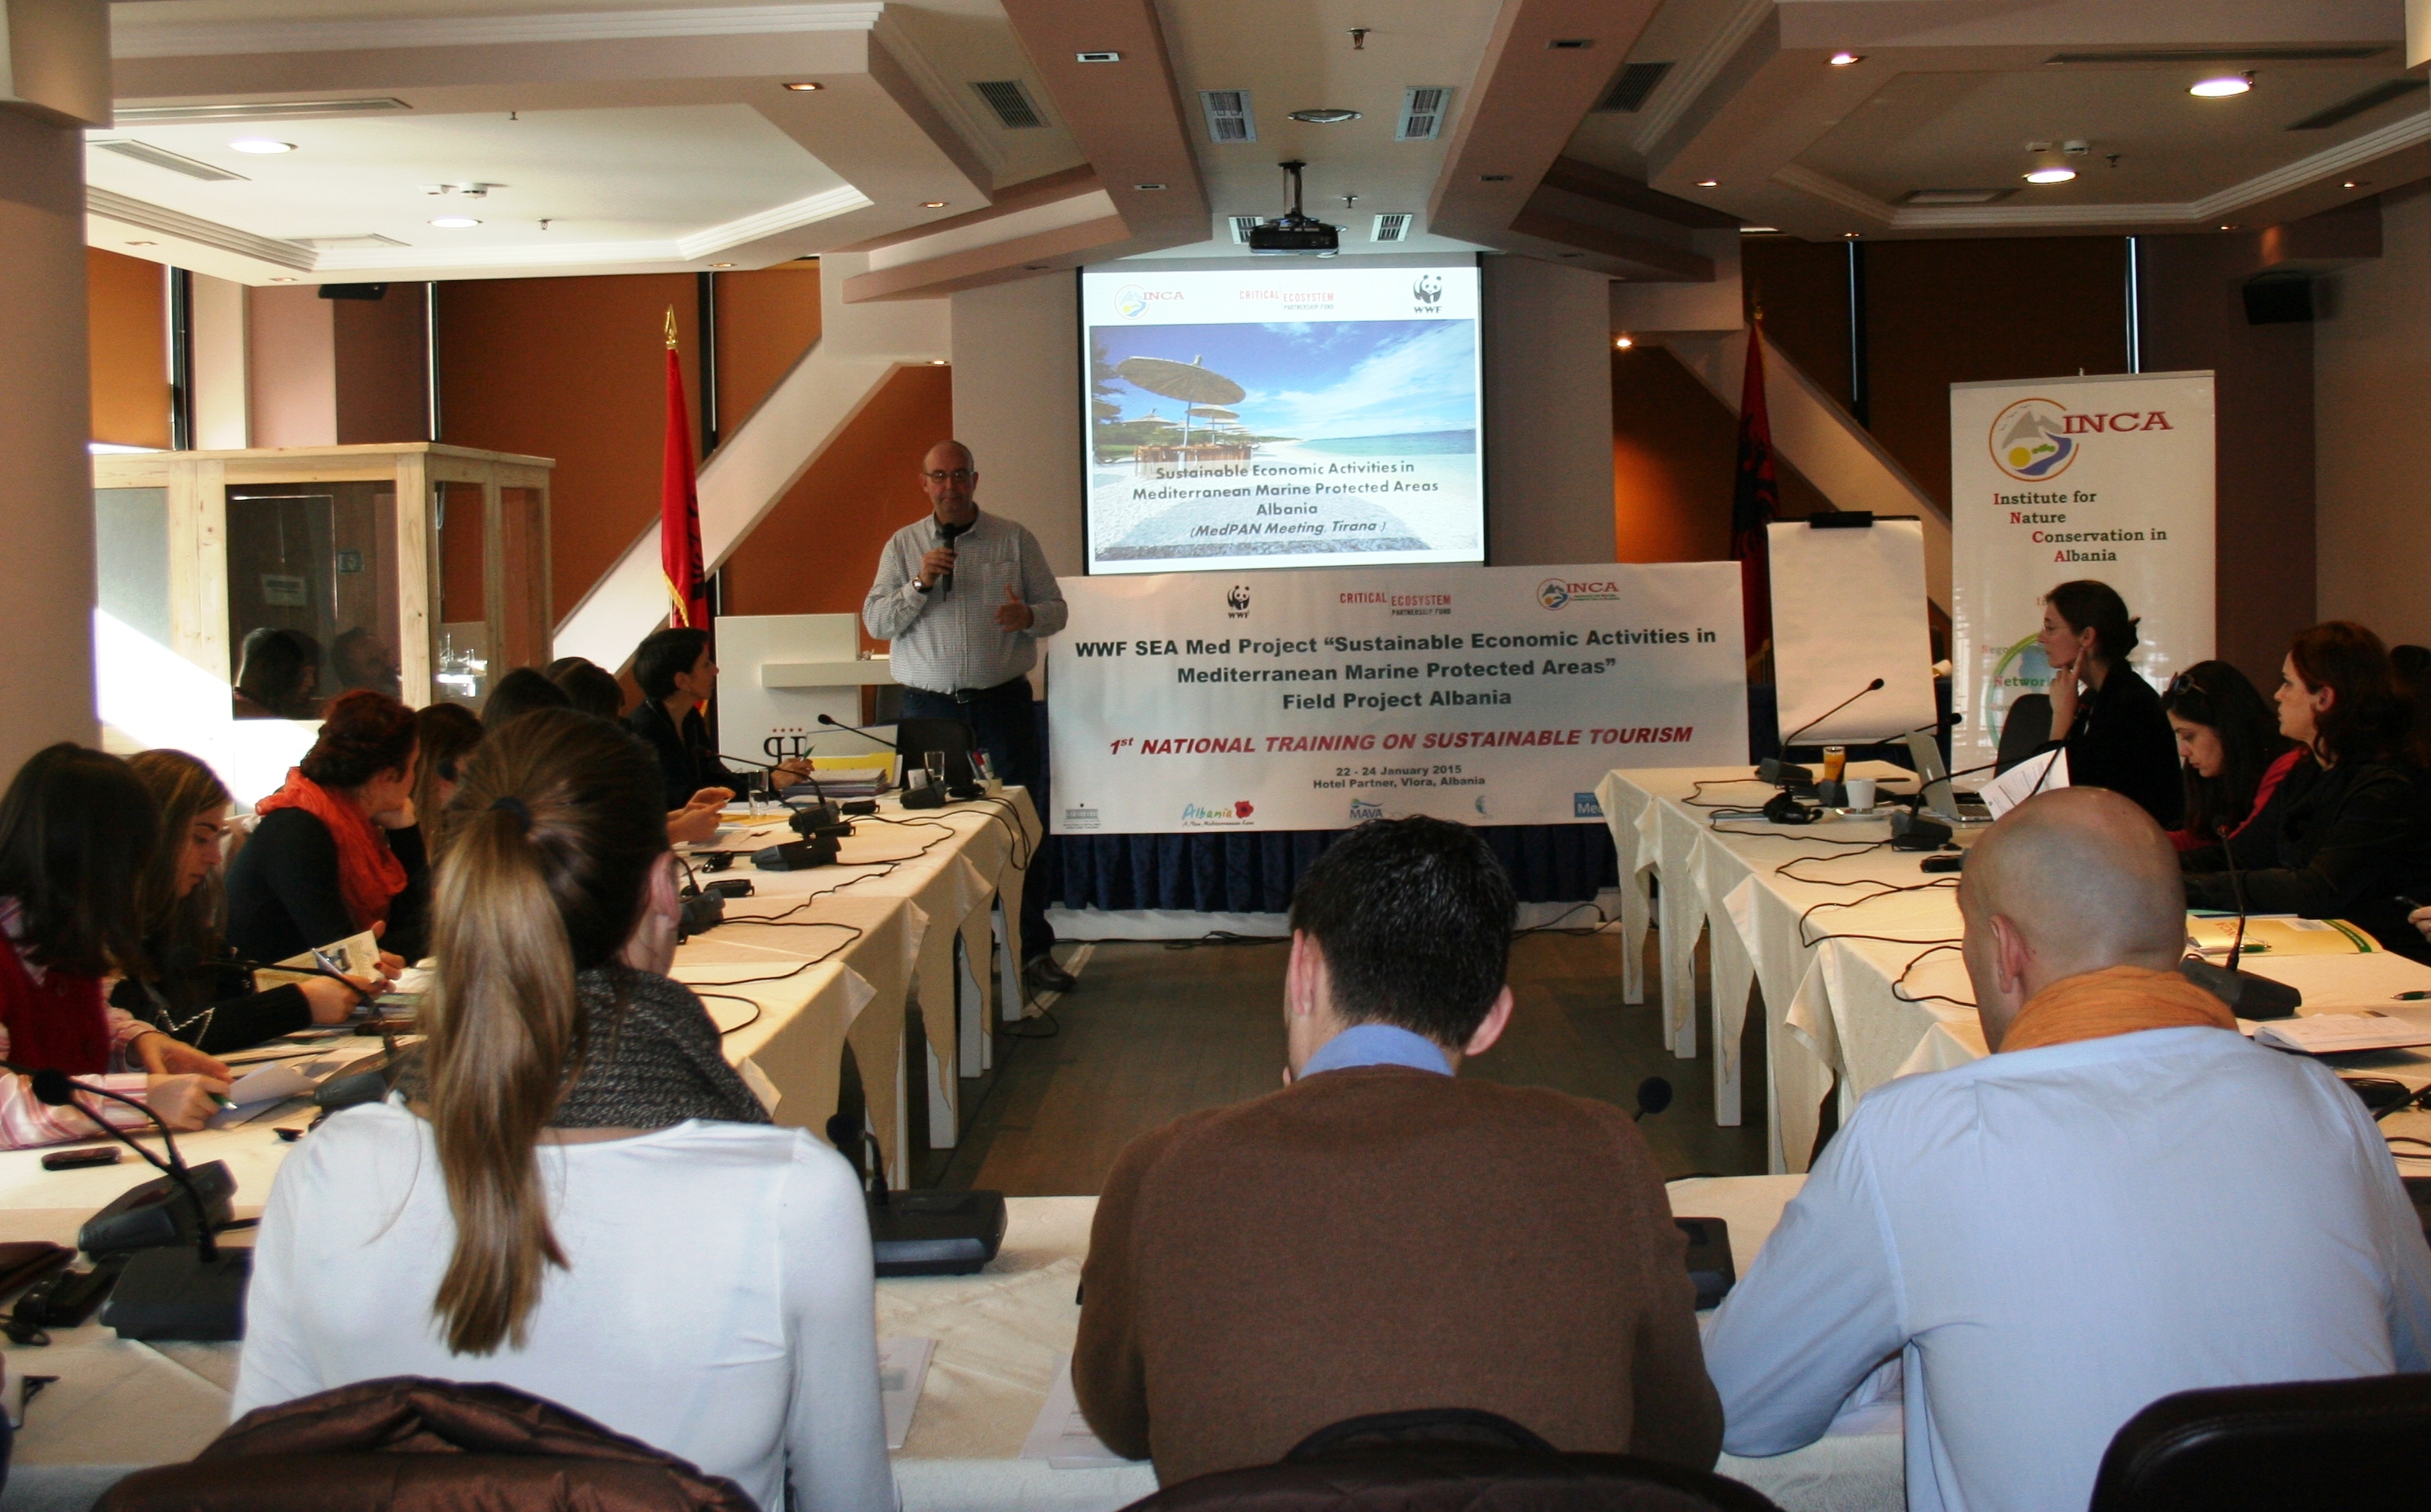 First National Training on Sustainable Tourism